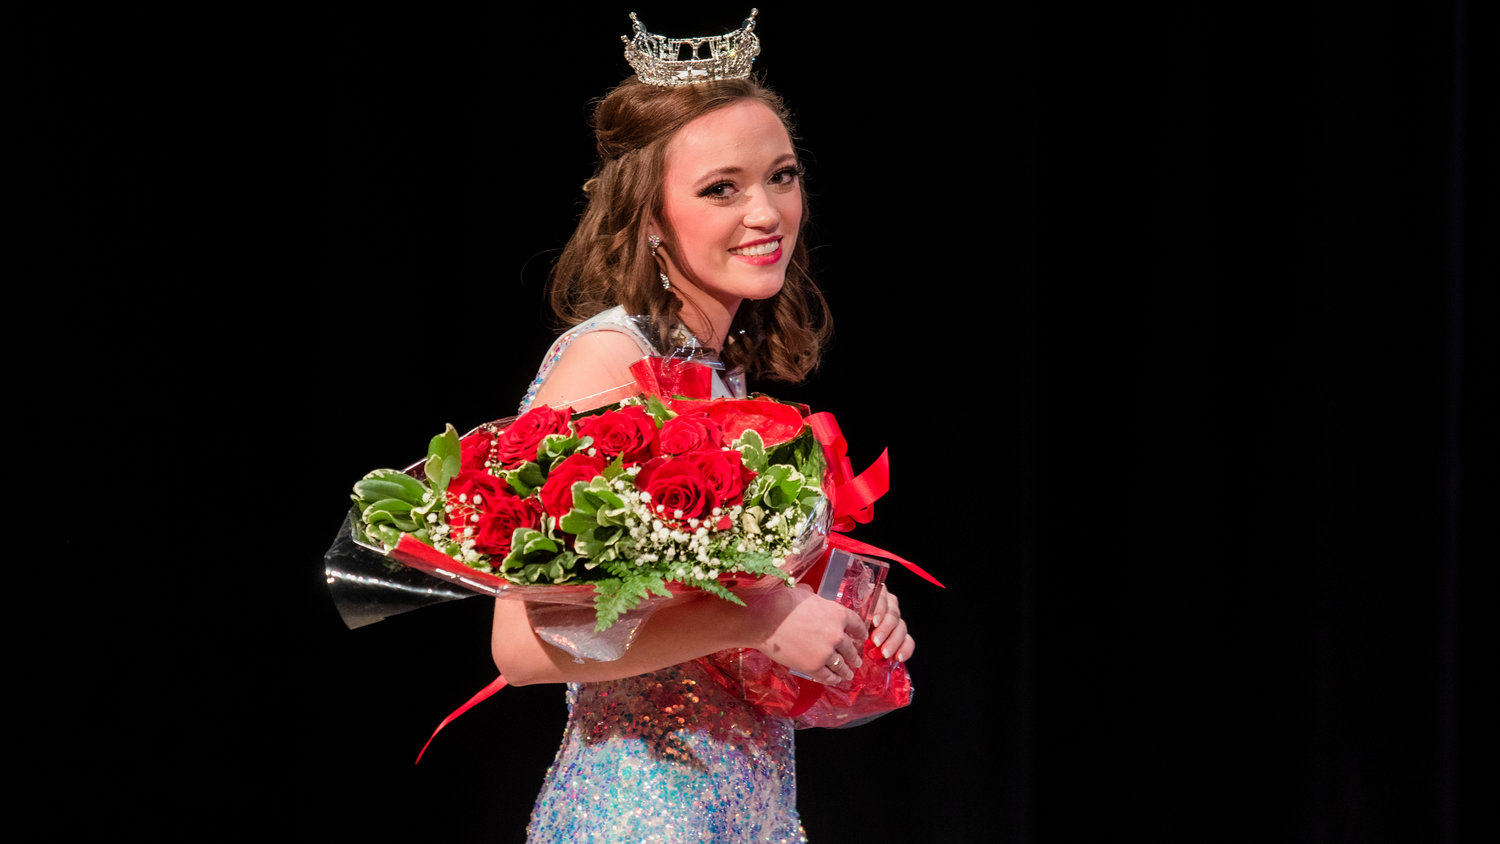 Briana Rasku holds flowers and awards while walking off stage after being crowned Miss Lewis County during an event held at Centralia High School Saturday night.